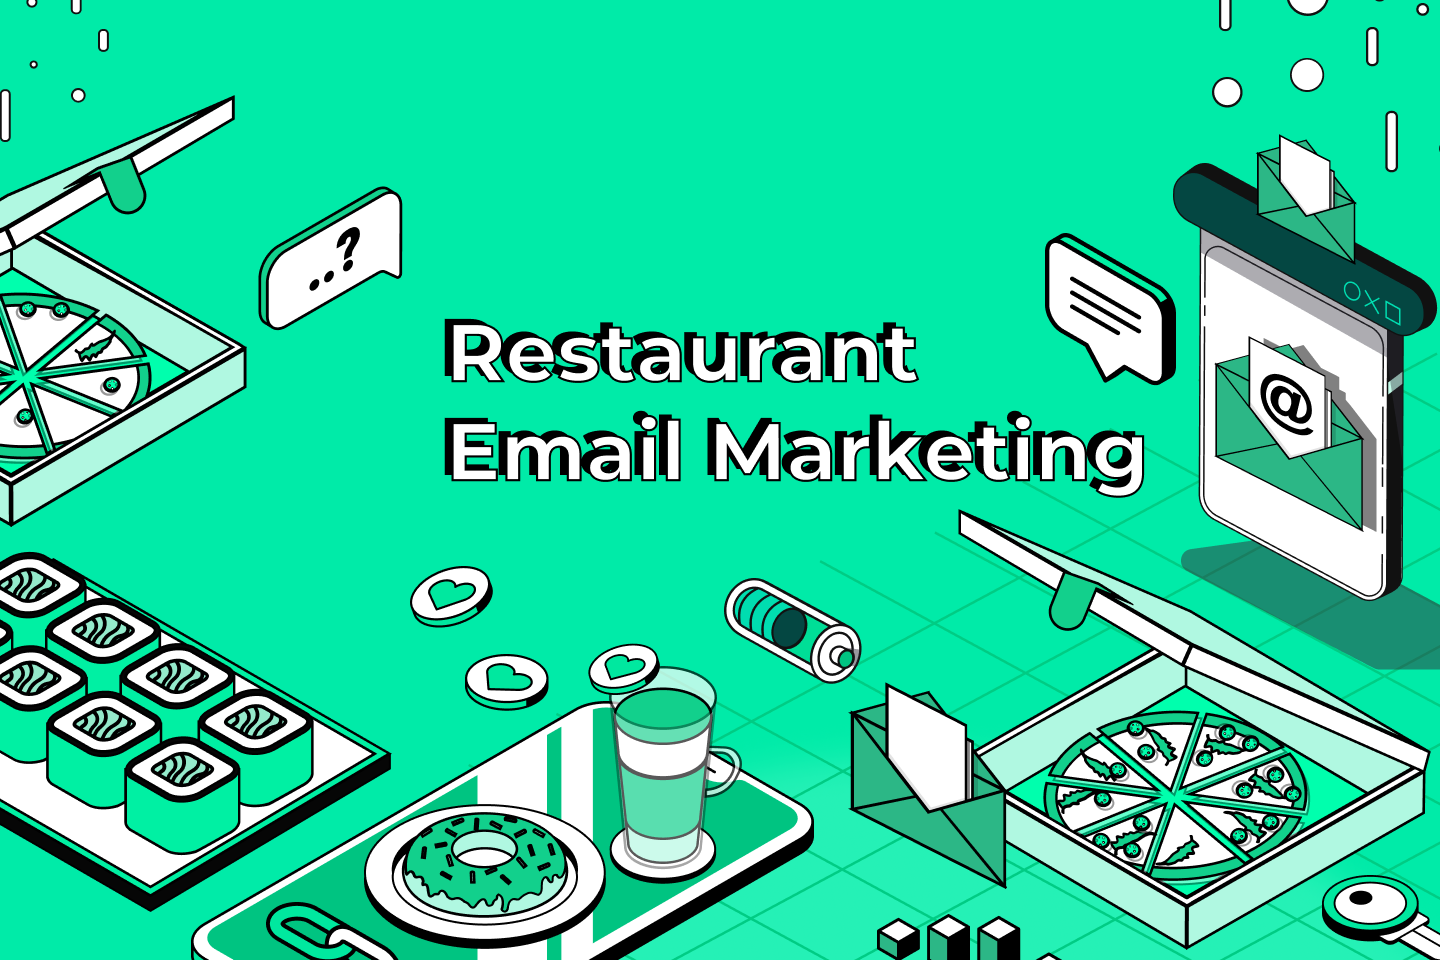 Restaurant Email Marketing (Getting Started)